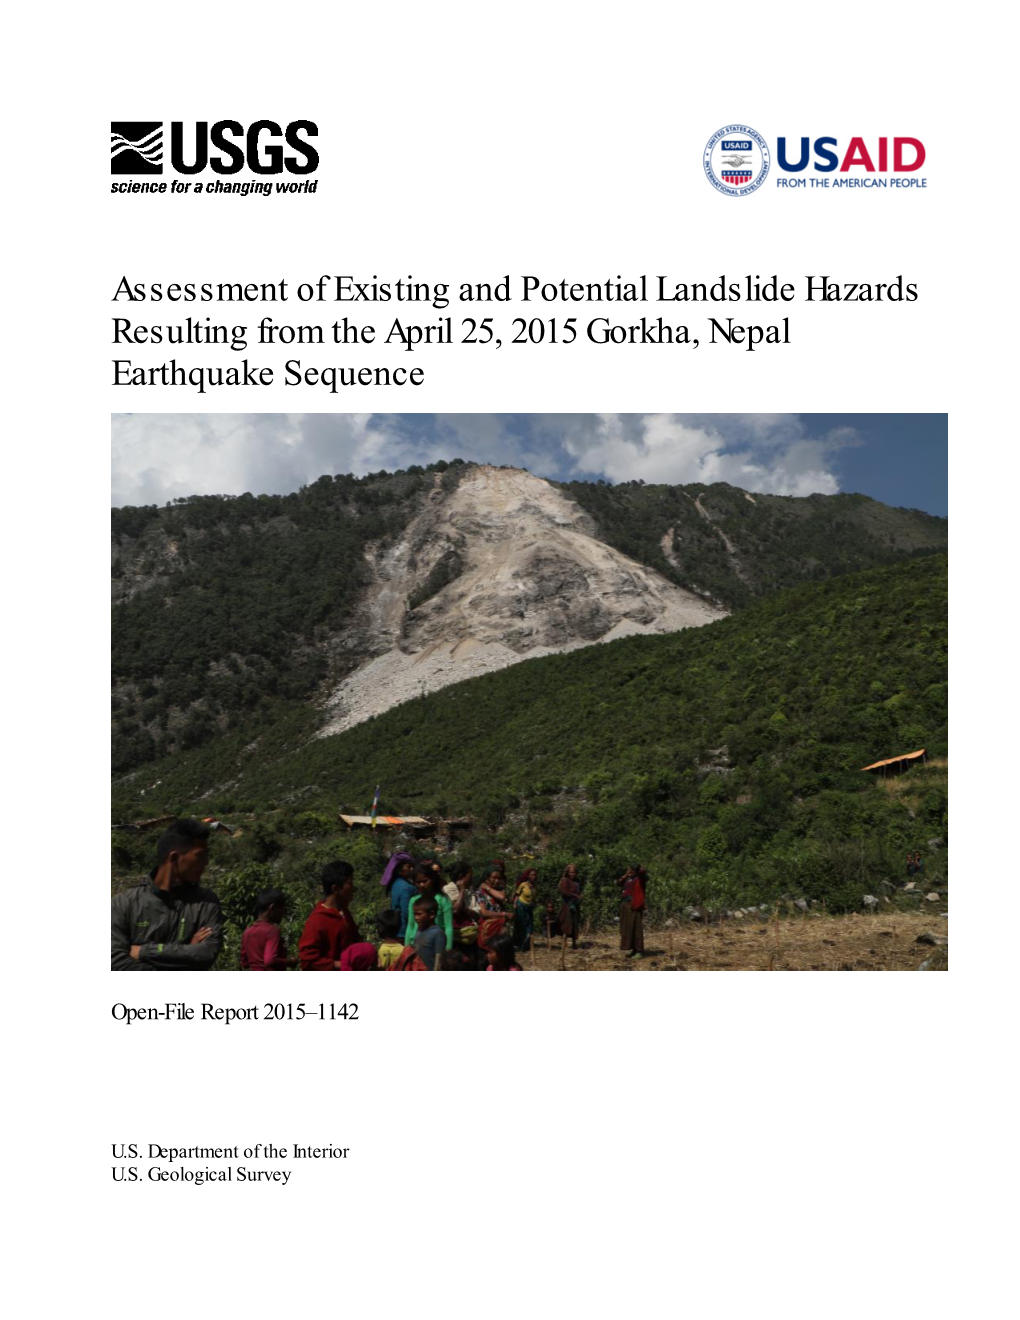 Assessment of Existing and Potential Landslide Hazards Resulting from the April 25, 2015 Gorkha, Nepal Earthquake Sequence